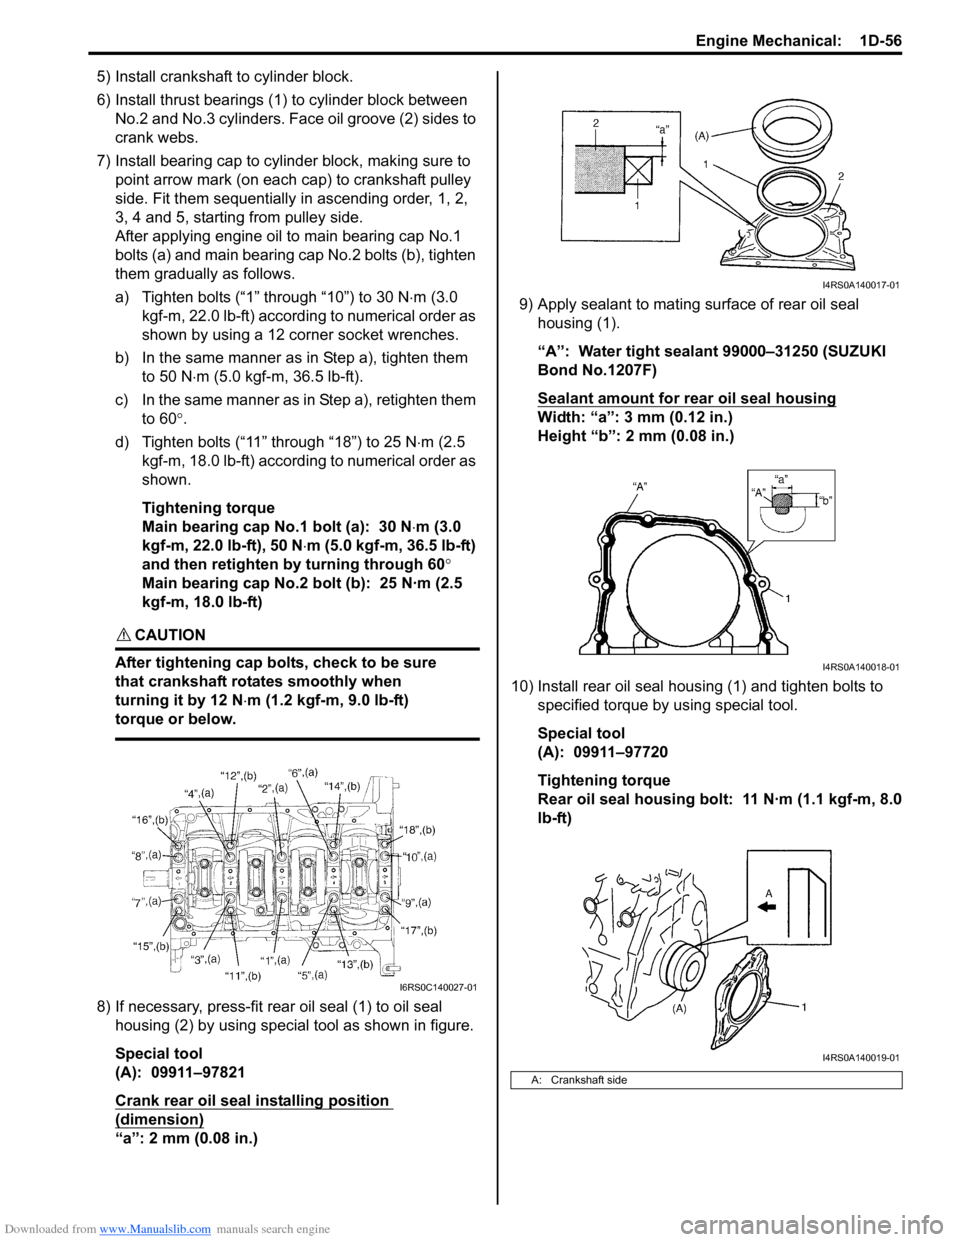 SUZUKI SWIFT 2007 2.G Service Workshop Manual Downloaded from www.Manualslib.com manuals search engine Engine Mechanical:  1D-56
5) Install crankshaft to cylinder block.
6) Install thrust bearings (1) to cylinder block between No.2 and No.3 cylin